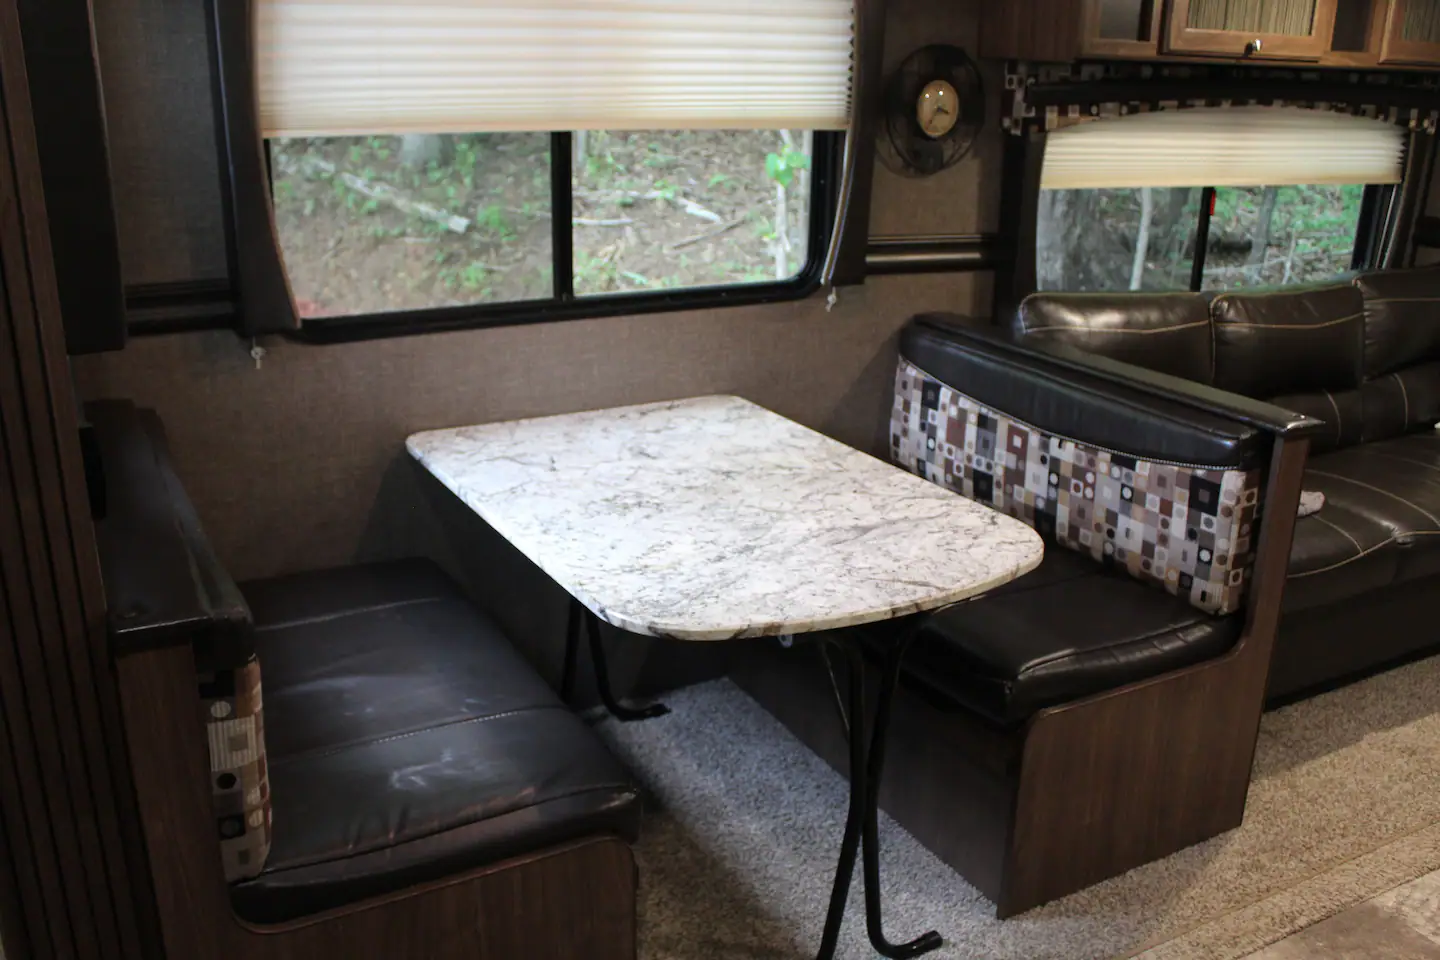 The kitchen table inside the RV